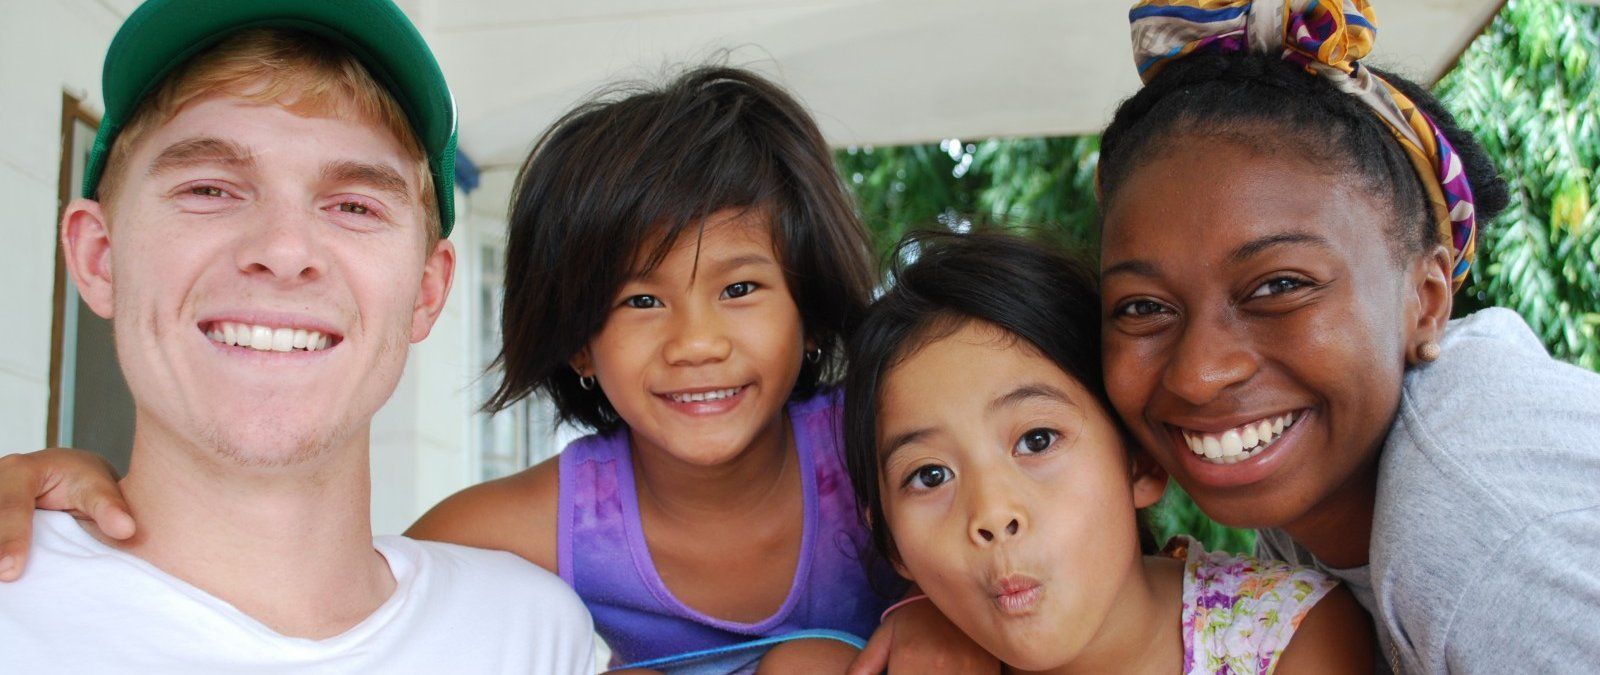 Mitchell and Jordan smile at the camera with Filipino children making funny faces.